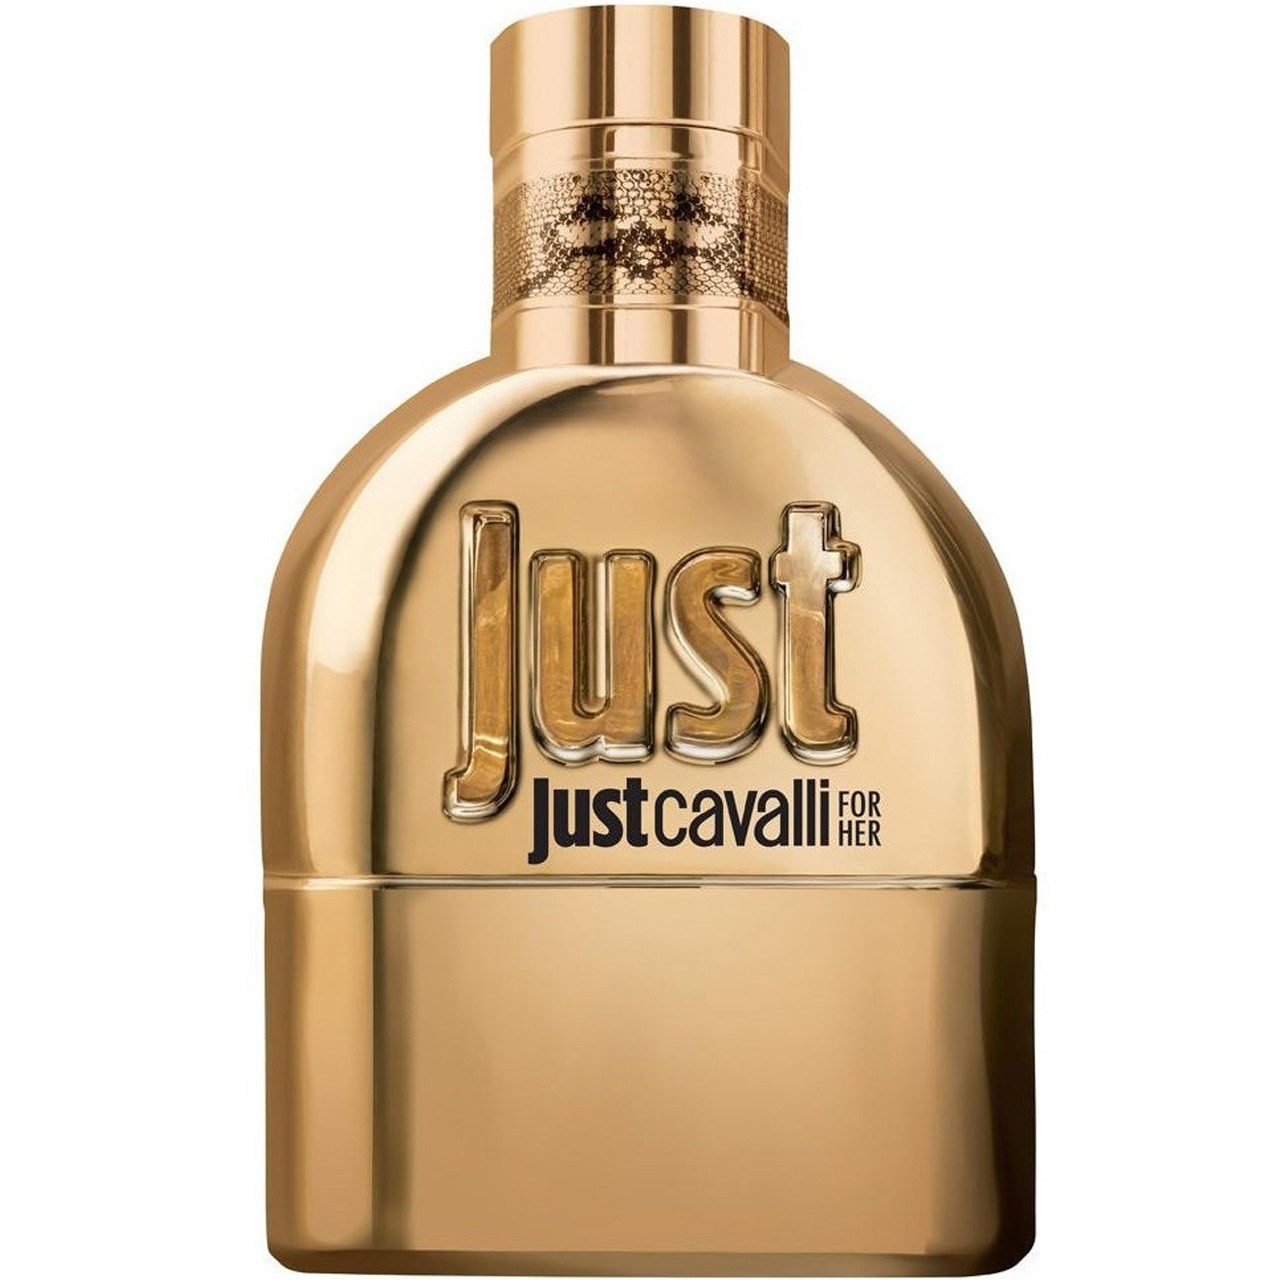 Hers gold. Женский аромат Roberto Cavalli just Cavalli. Just Cavalli золотой. Roberto Cavalli for her Gold 100ml. Roberto Cavalli Gold.